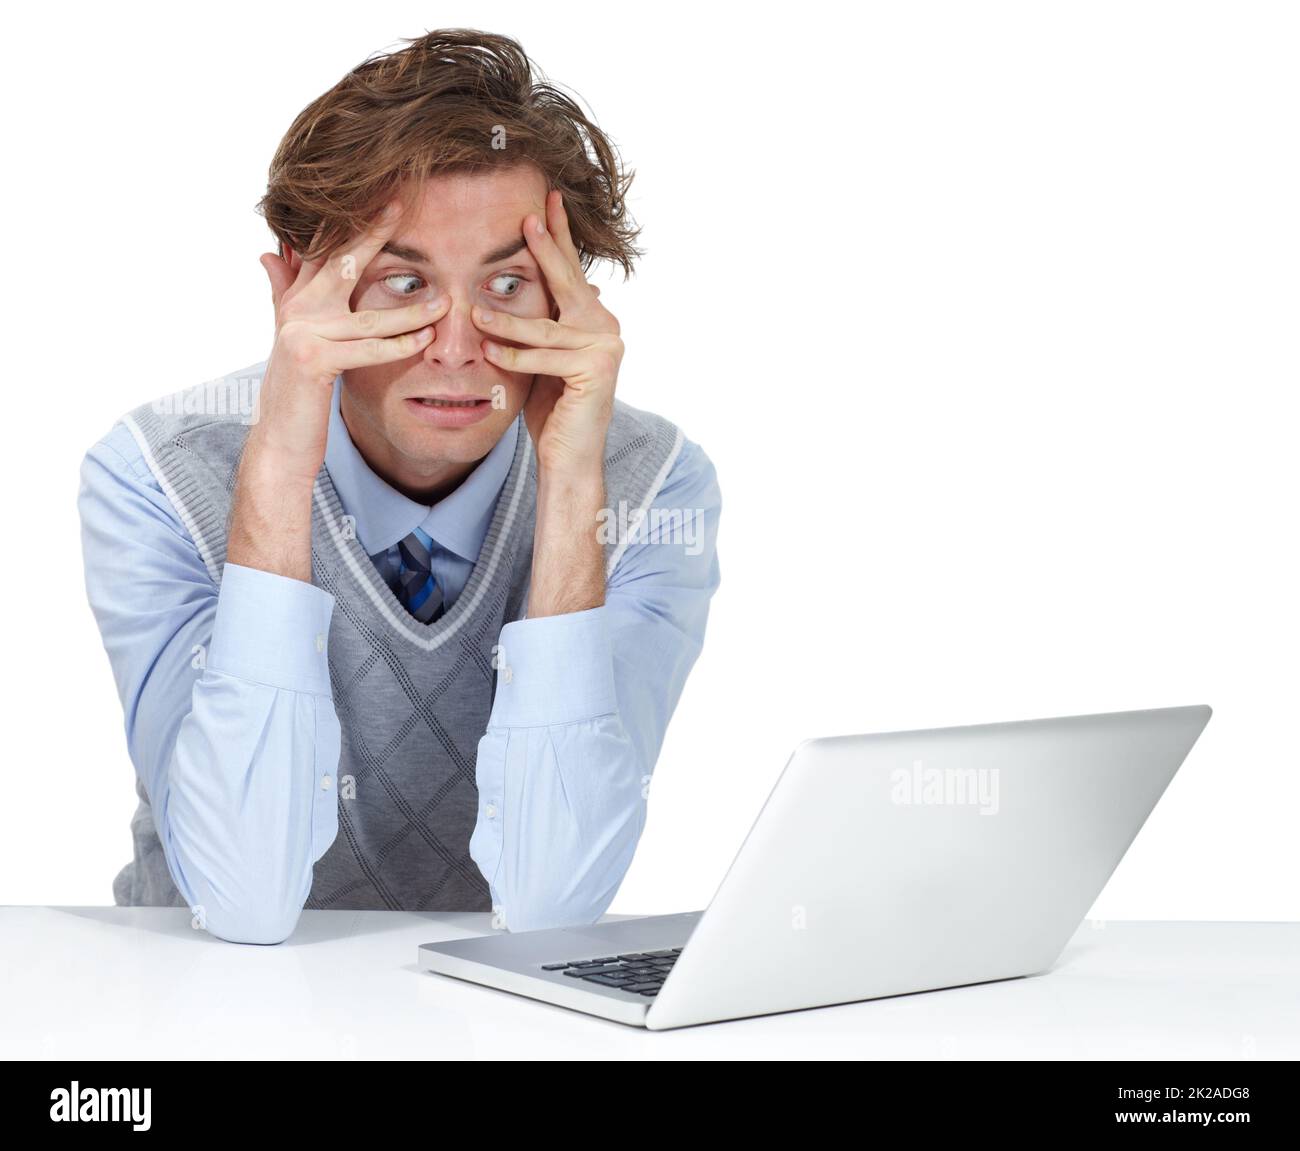 Im freakin out. A young man grimacing through his fingers while sitting next to his laptop. Stock Photo